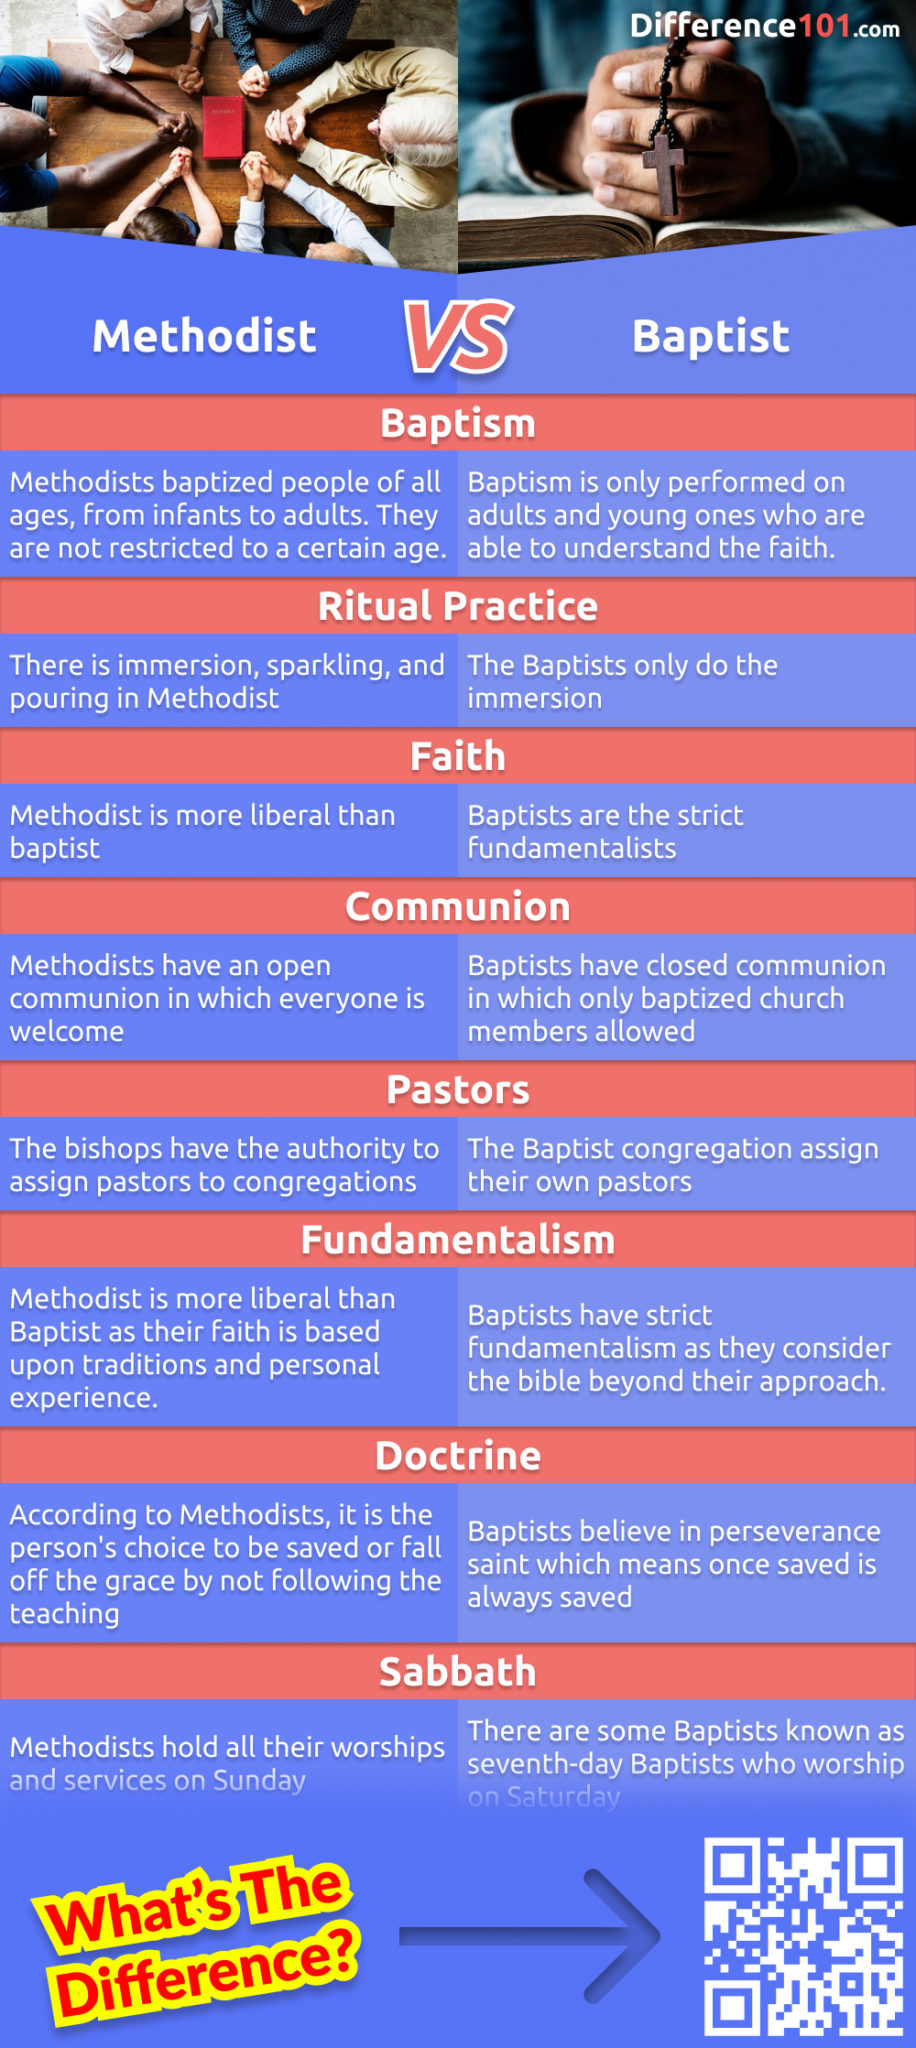 Methodists and Baptists are both Christian denominations, but the way they perform their religious ceremonies is slightly different. Do you know the difference? Read more here.